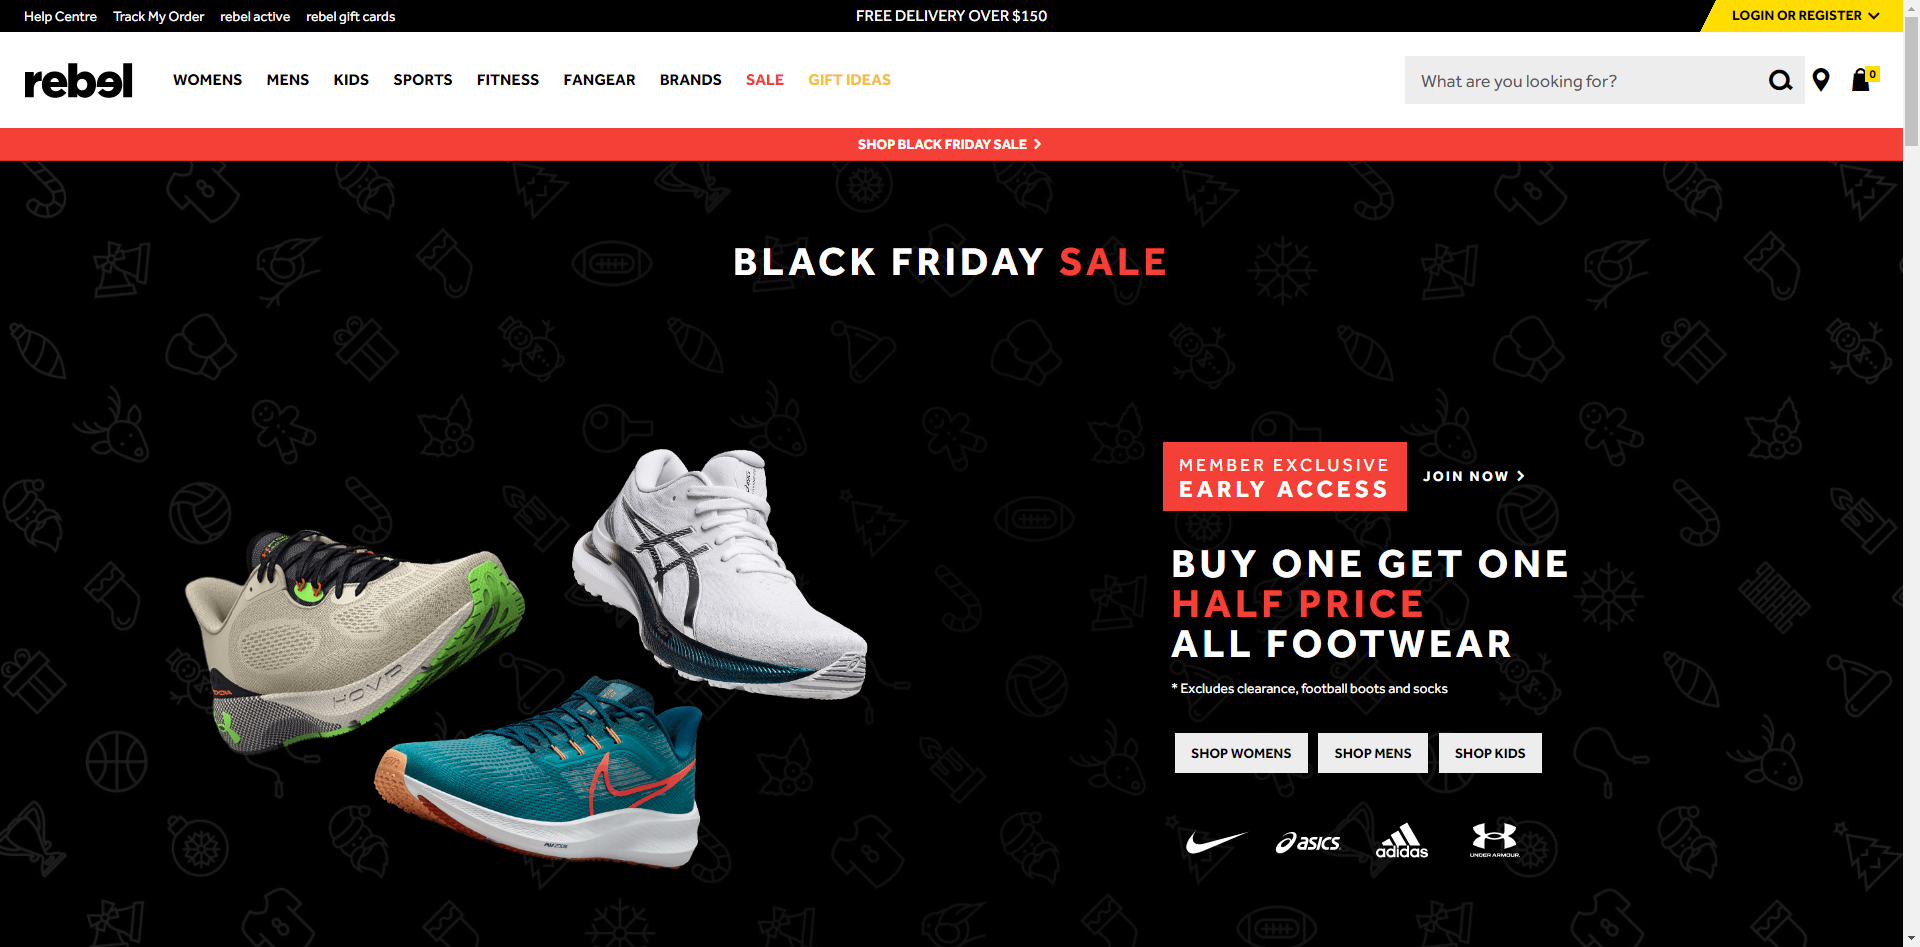 rebel Black Friday sale. Save on footwear, clothing, fitness, bikes and more